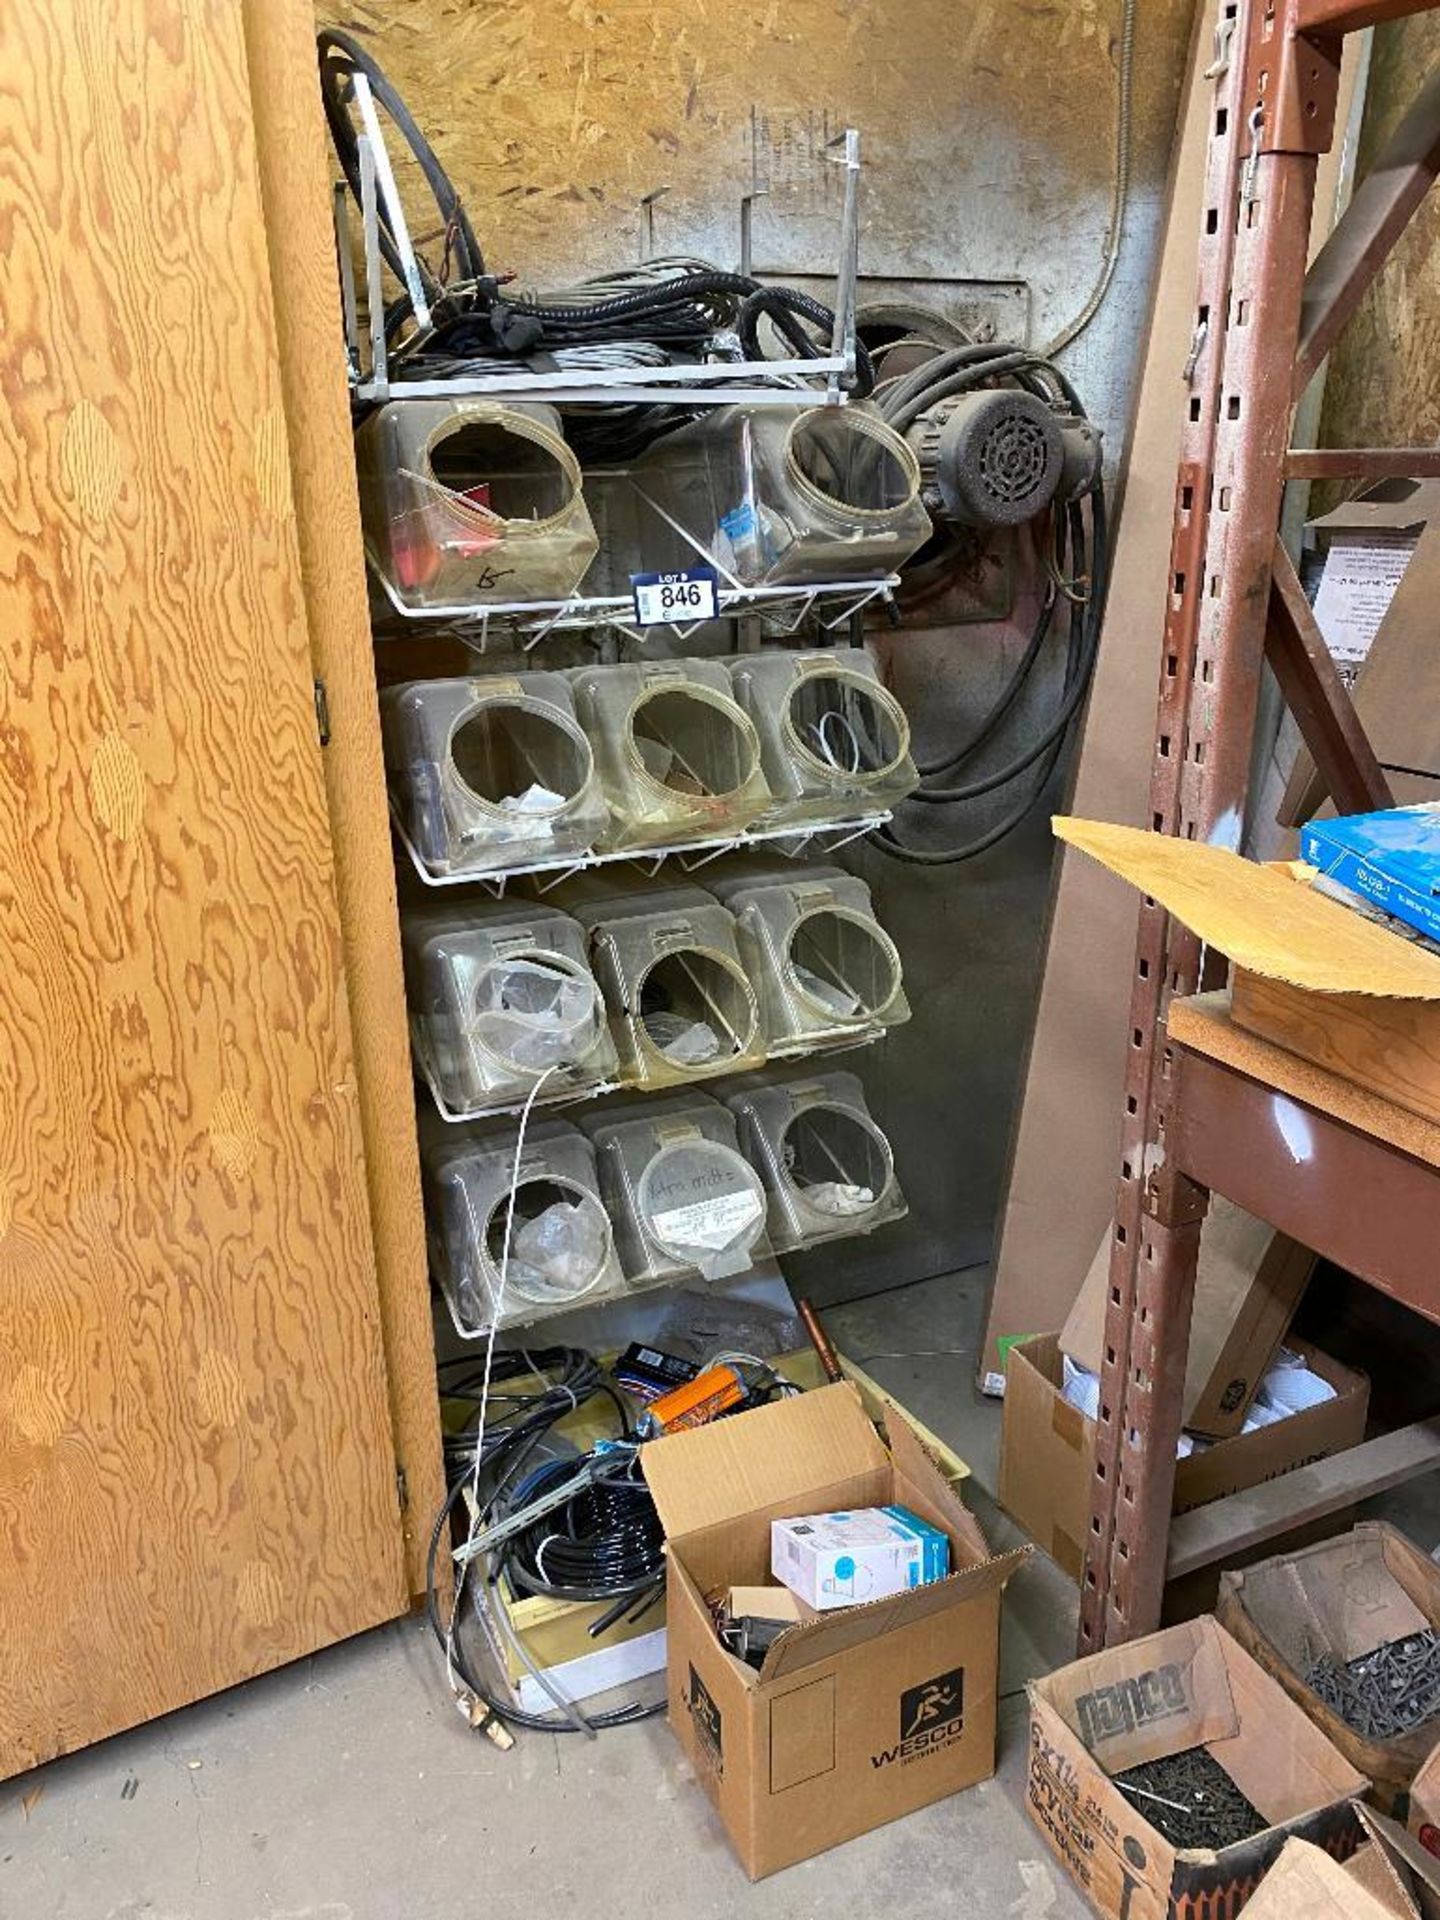 Wire Frame Parts Shelf w/ Plastic Bins and Contents including Asst. Wiring, Parts, etc.